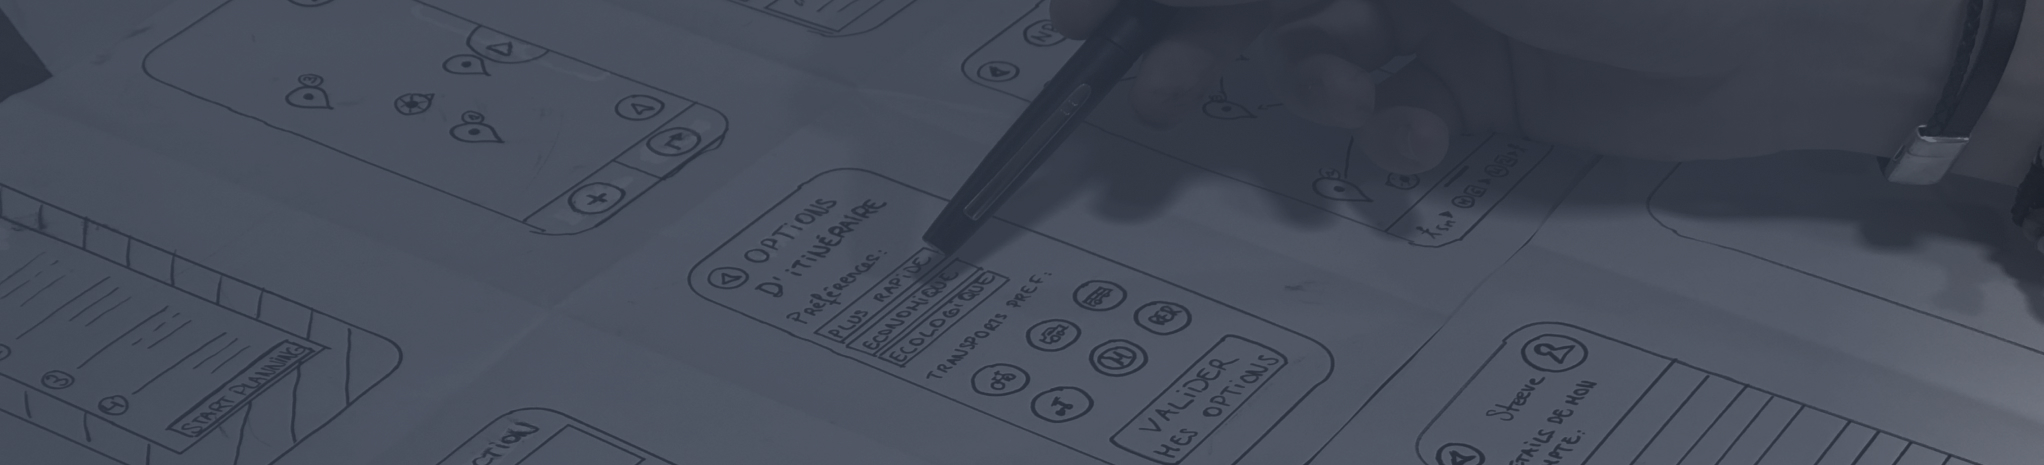 Zoomed in image of drawn wireframes of a mobile device